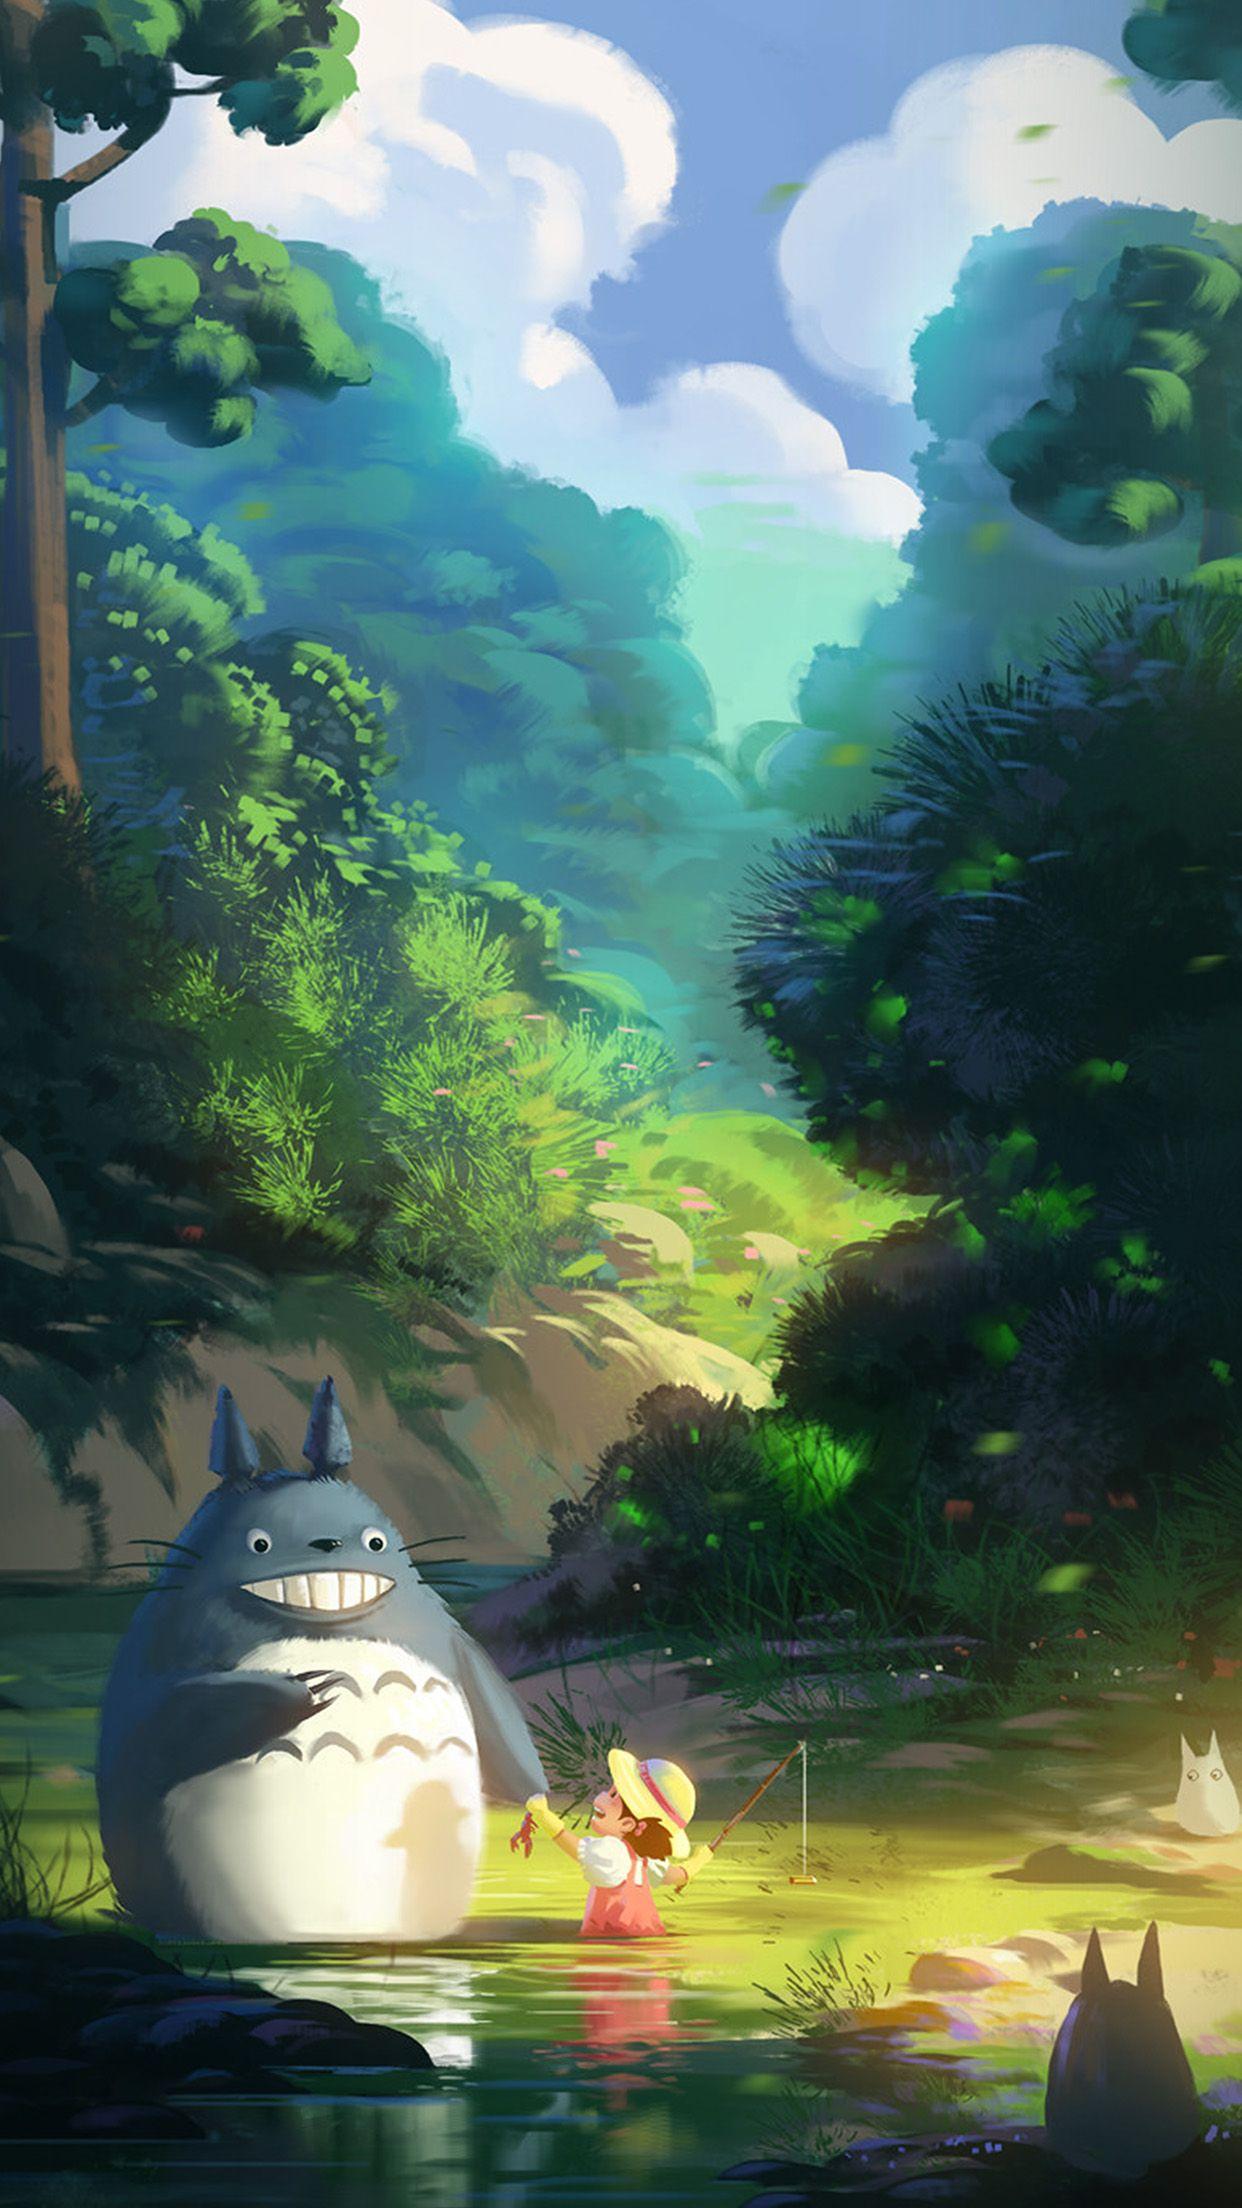 Totoro Anime Liang Xing Illustration Art Android wallpaper